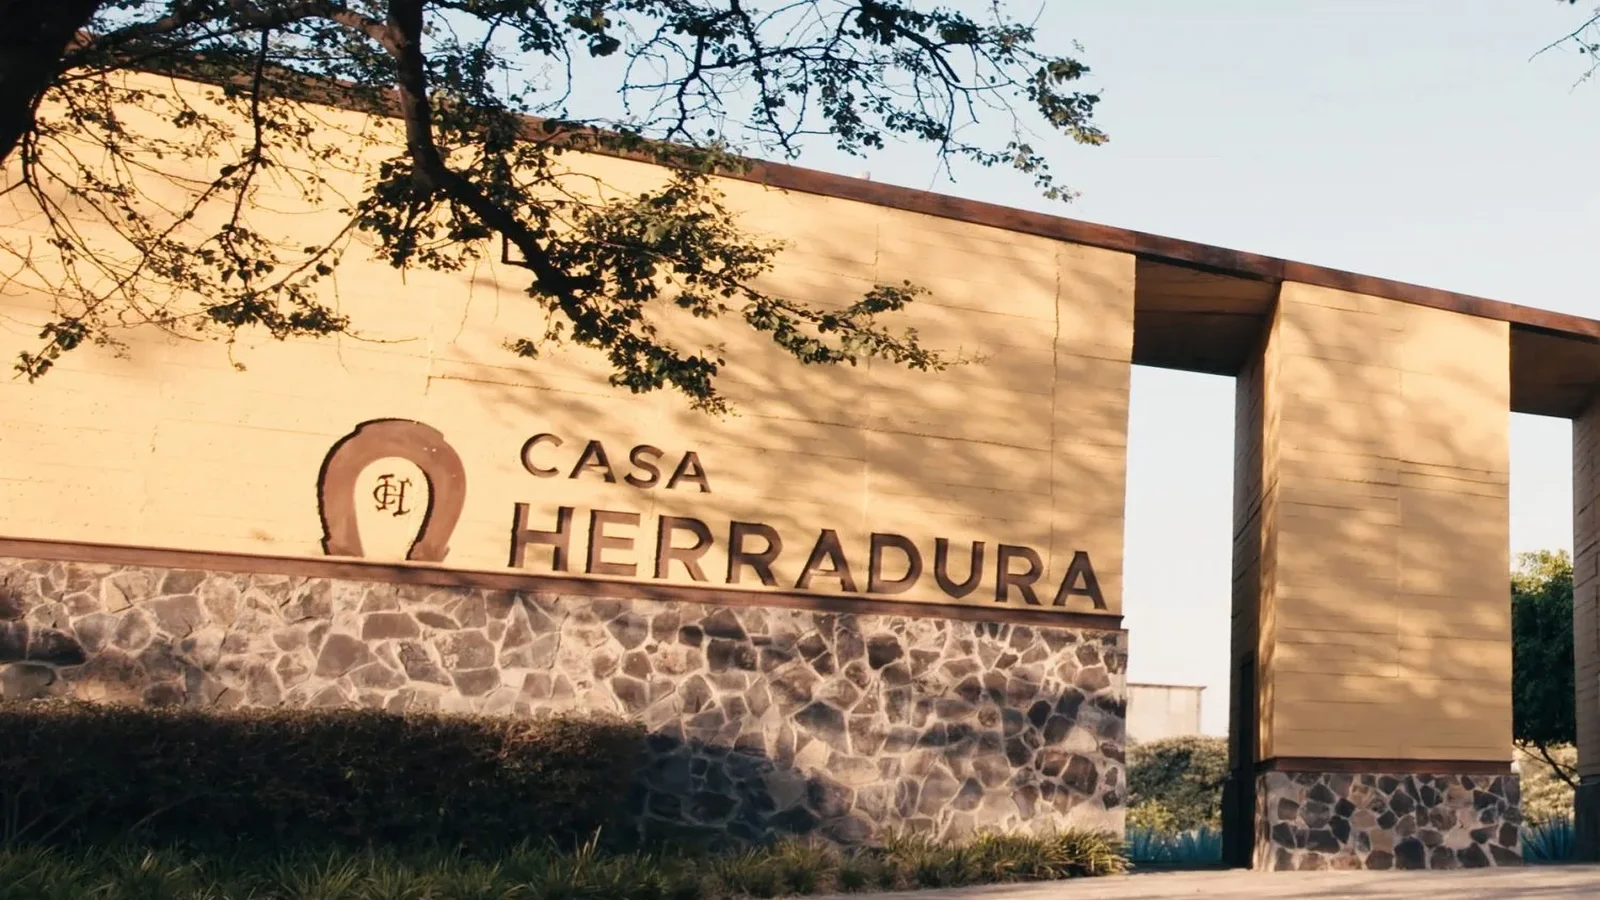 Brown–Forman Corp invests US$200m in expanding tequila production capacity at Casa Herradura distillery